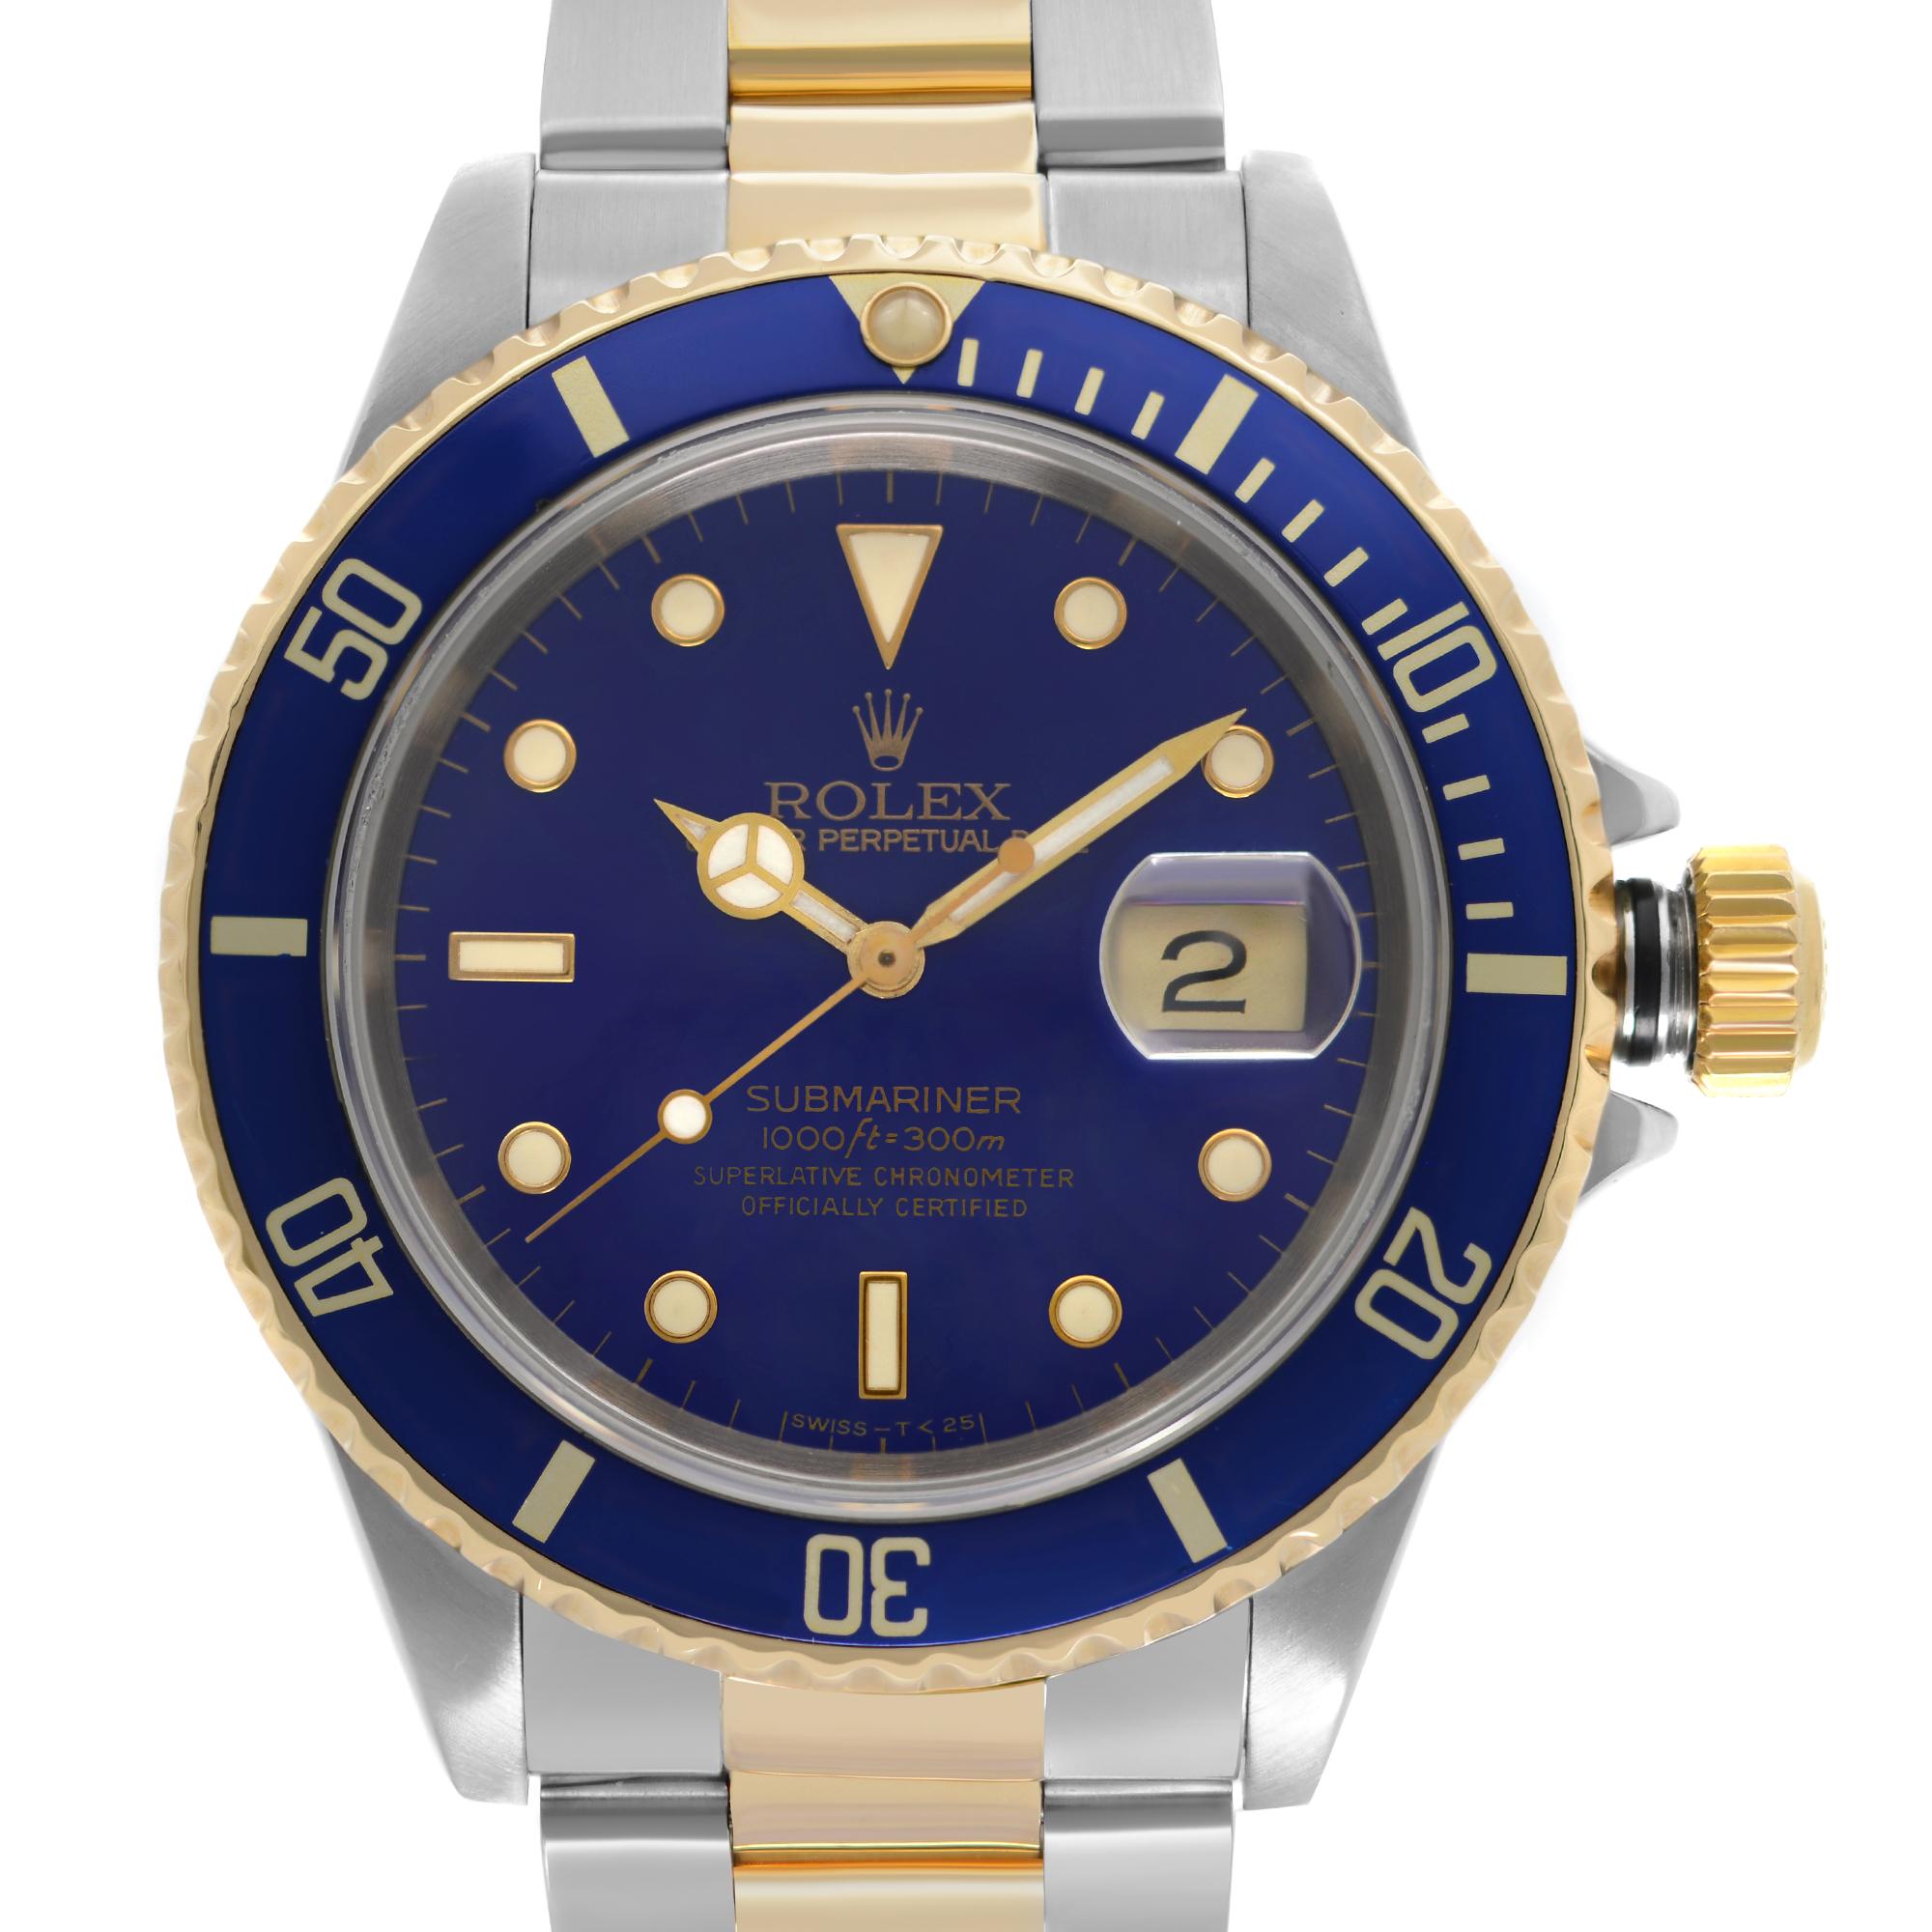 Pre-owned Rolex Submariner 18K Yellow Gold Steel Holes Case Blue Dial Automatic Men's Watch. This Beautiful Timepiece Was Produced in 1990. The Bezel of This Watch Has a Few Minor Hairline Scratches. Swiss Tritium Dial. No Original Box and Papers